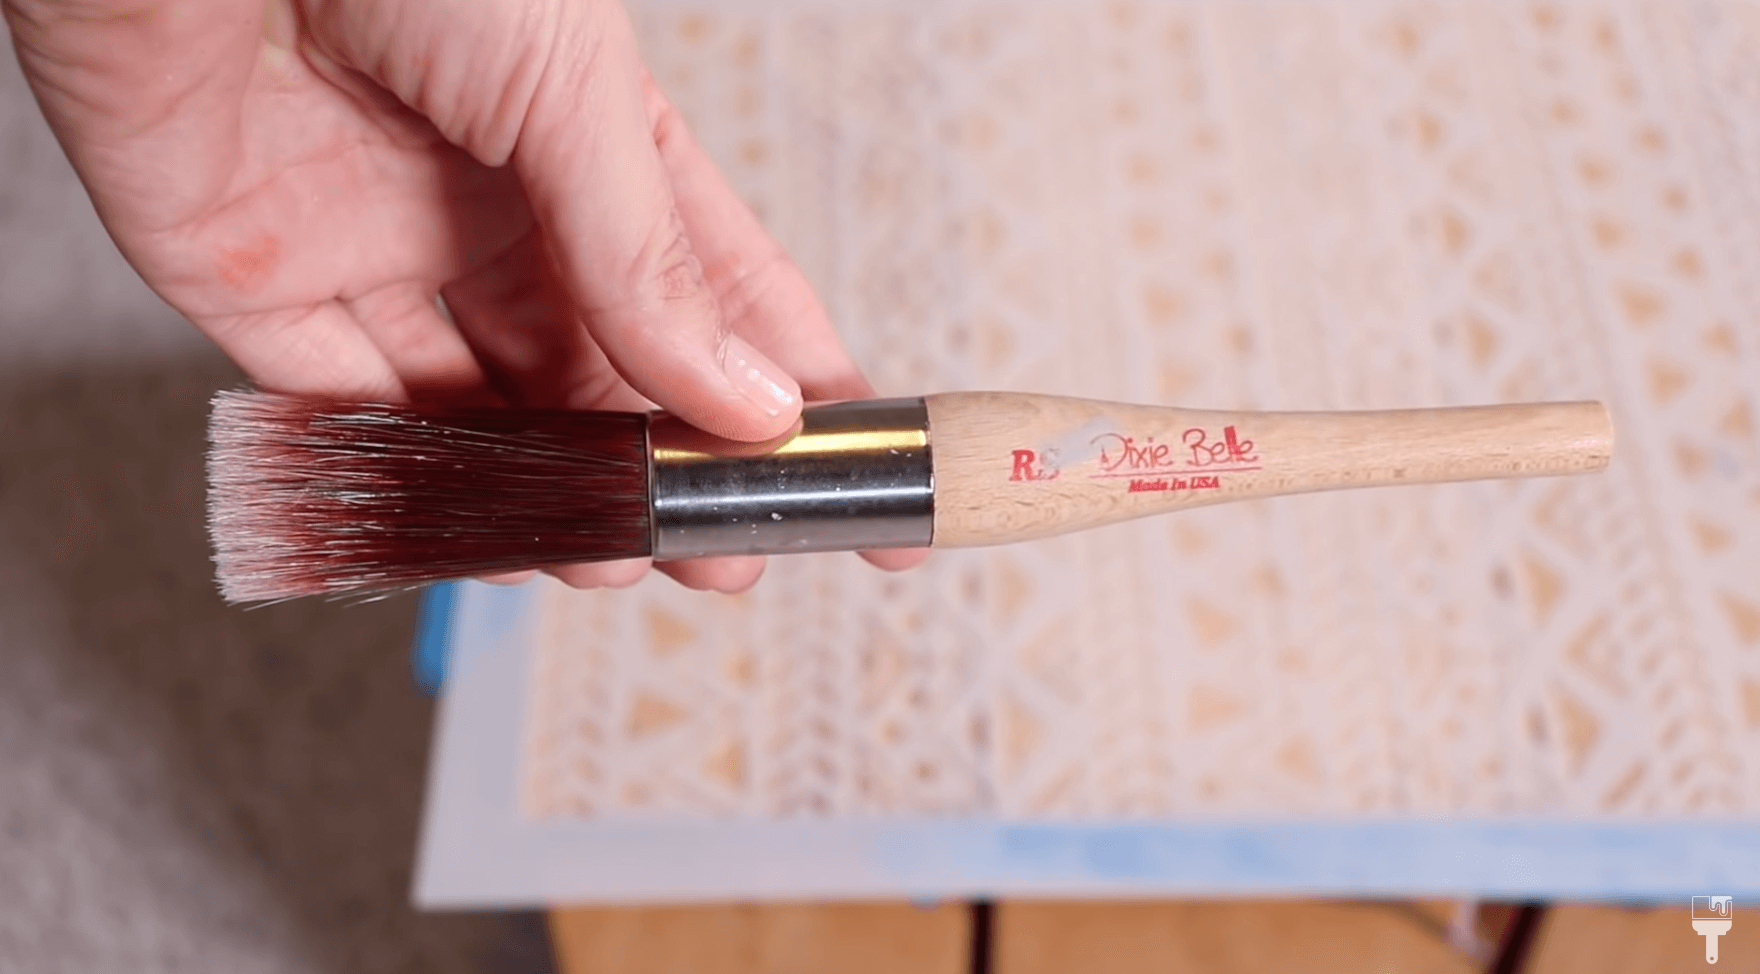 How To Apply Silk Screen Stencils With Dixie Belle Paint